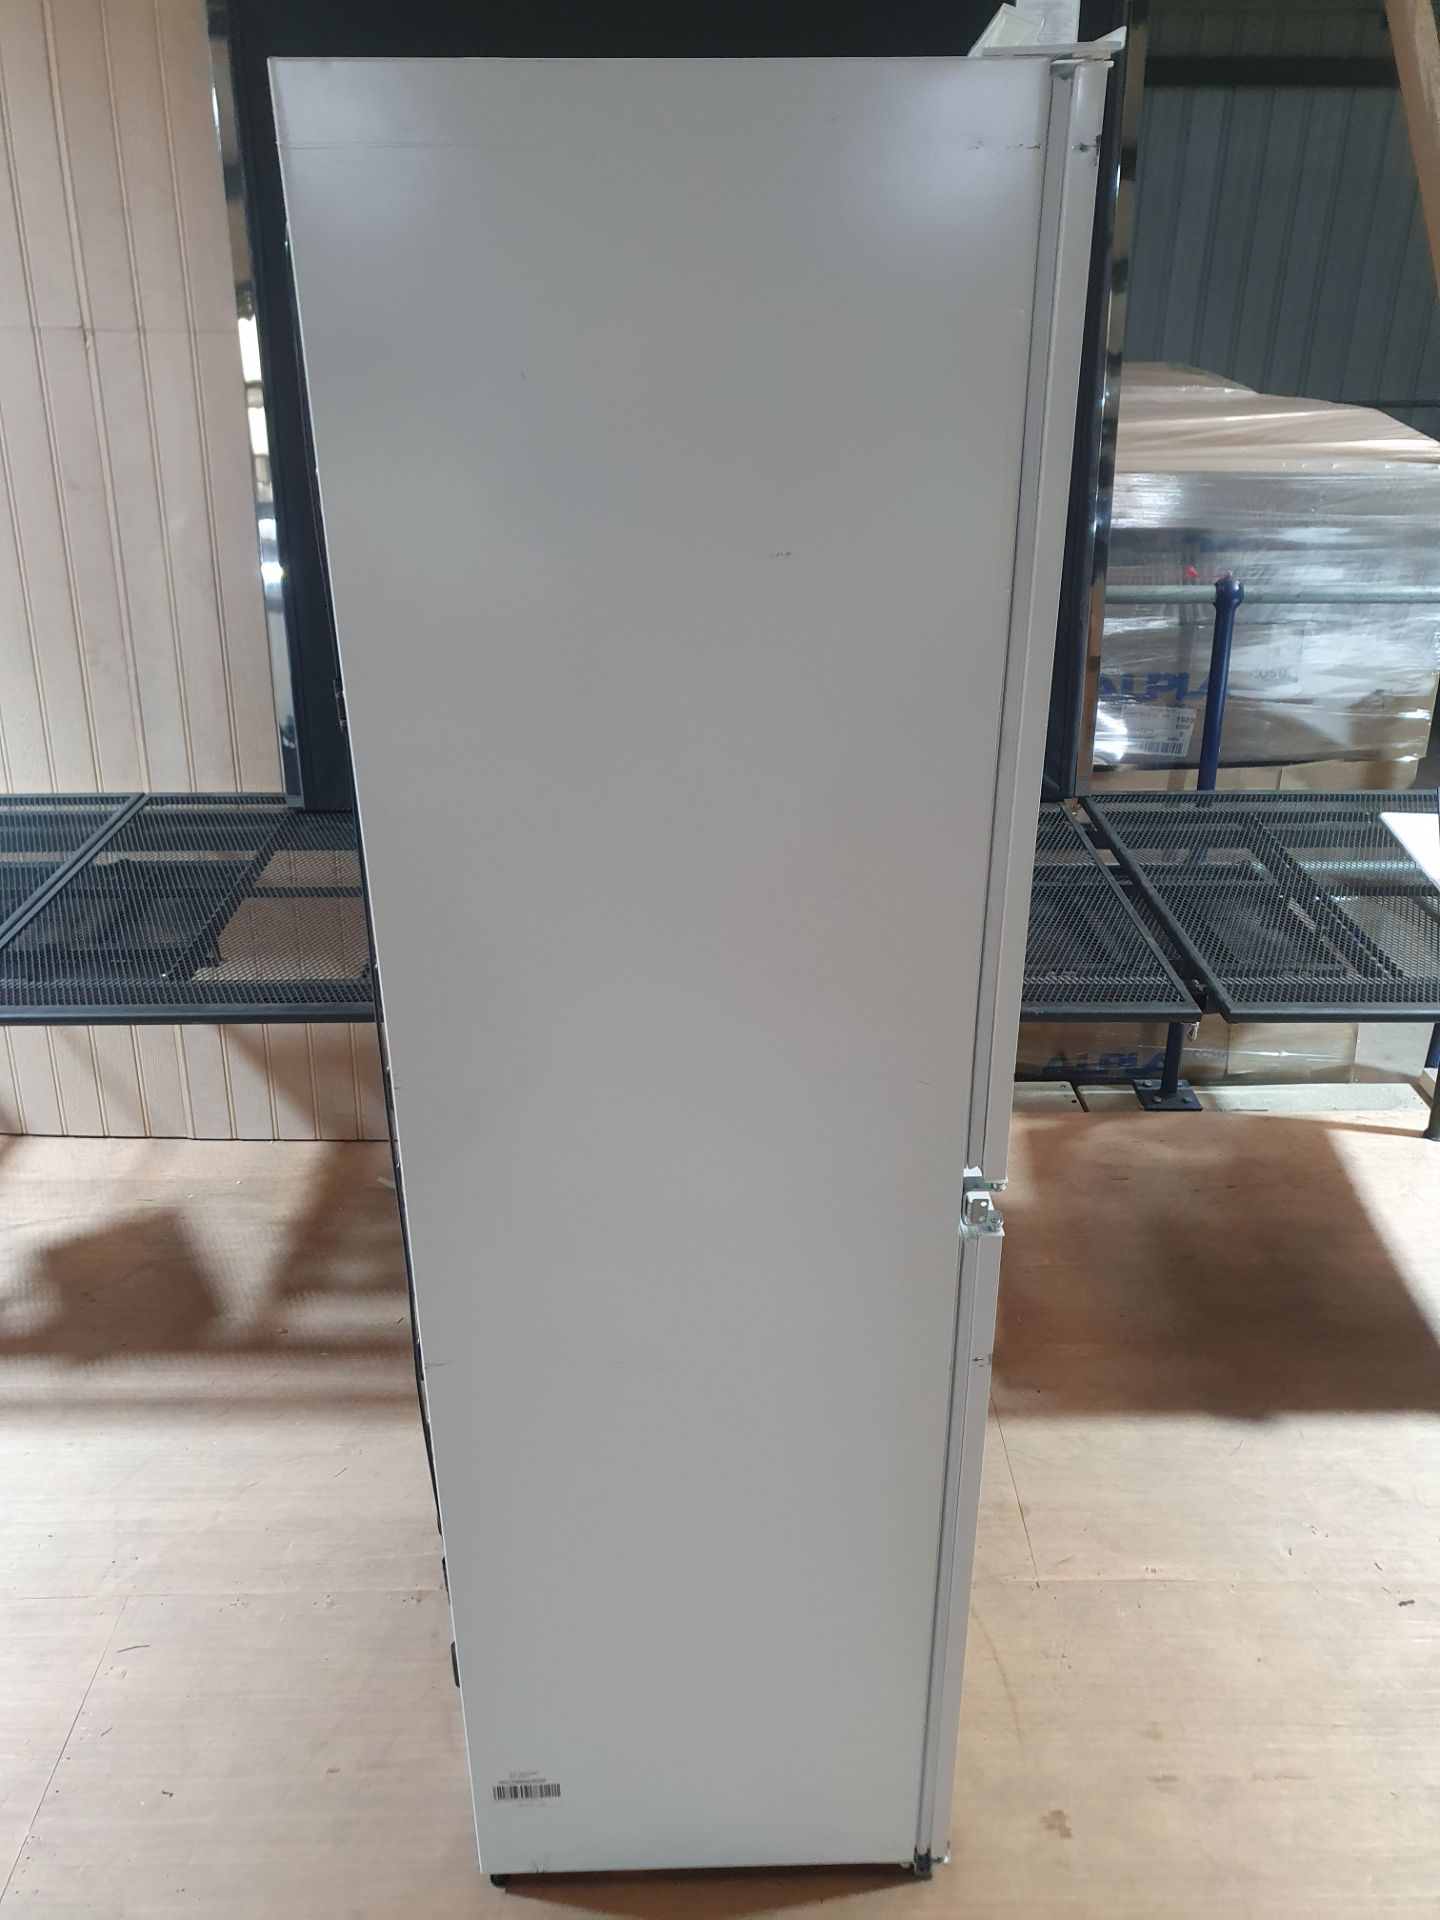 Current Online Price £859. Smeg Universal Built In Right Hinge Refrigerator White UKC4172F - Image 14 of 16